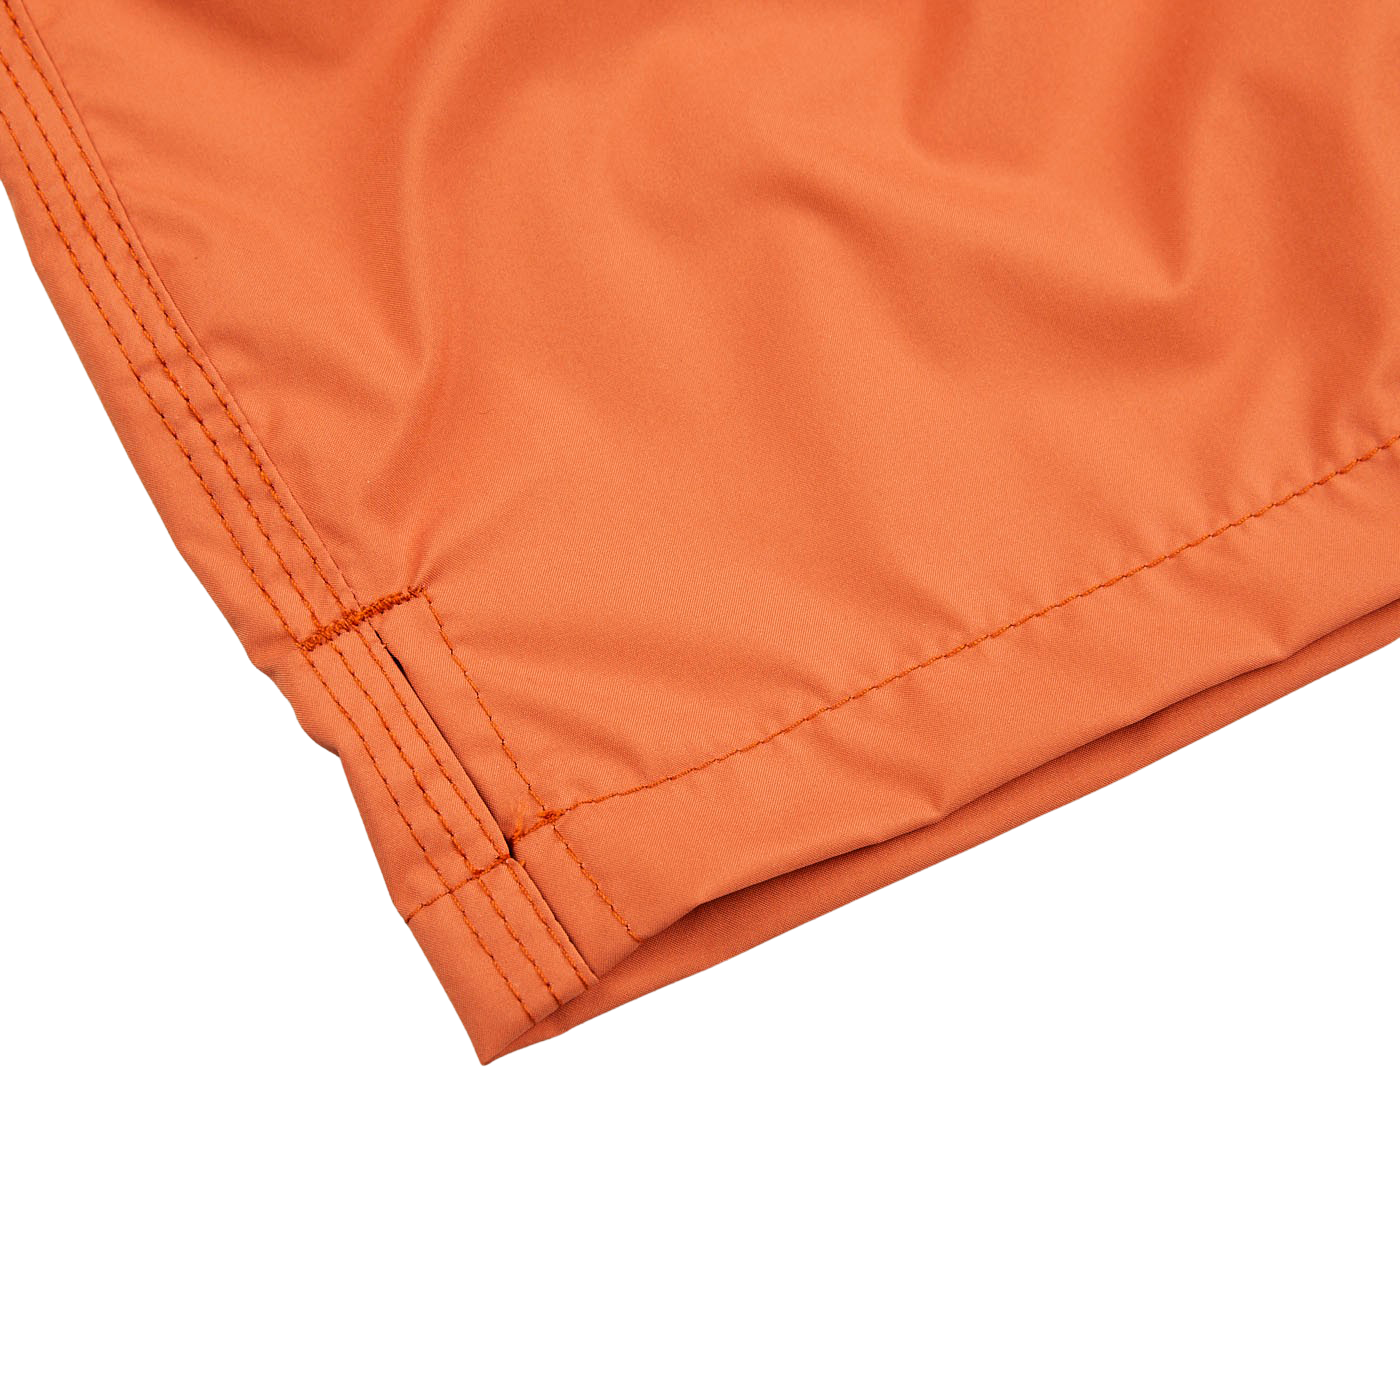 A pair of Fedeli Rust Brown Microfiber Madeira Swim Shorts with a mesh lining, placed on a white surface.